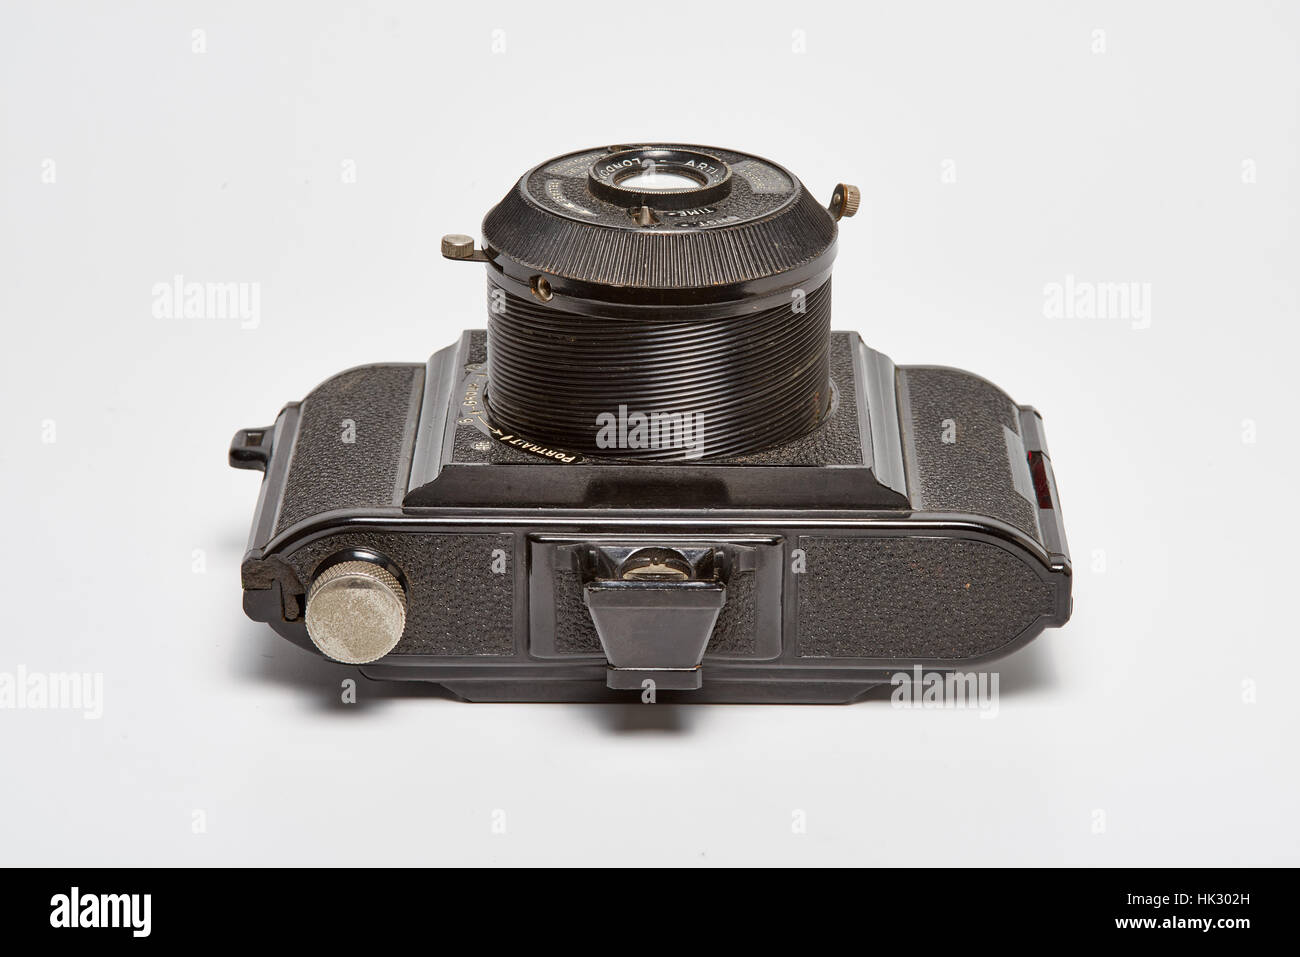 The Arti-Six is a British Bakelite viewfinder camera made around 1950. It had a screw-tube lens - when taking a photograph, the lens is screwed forwar Stock Photo